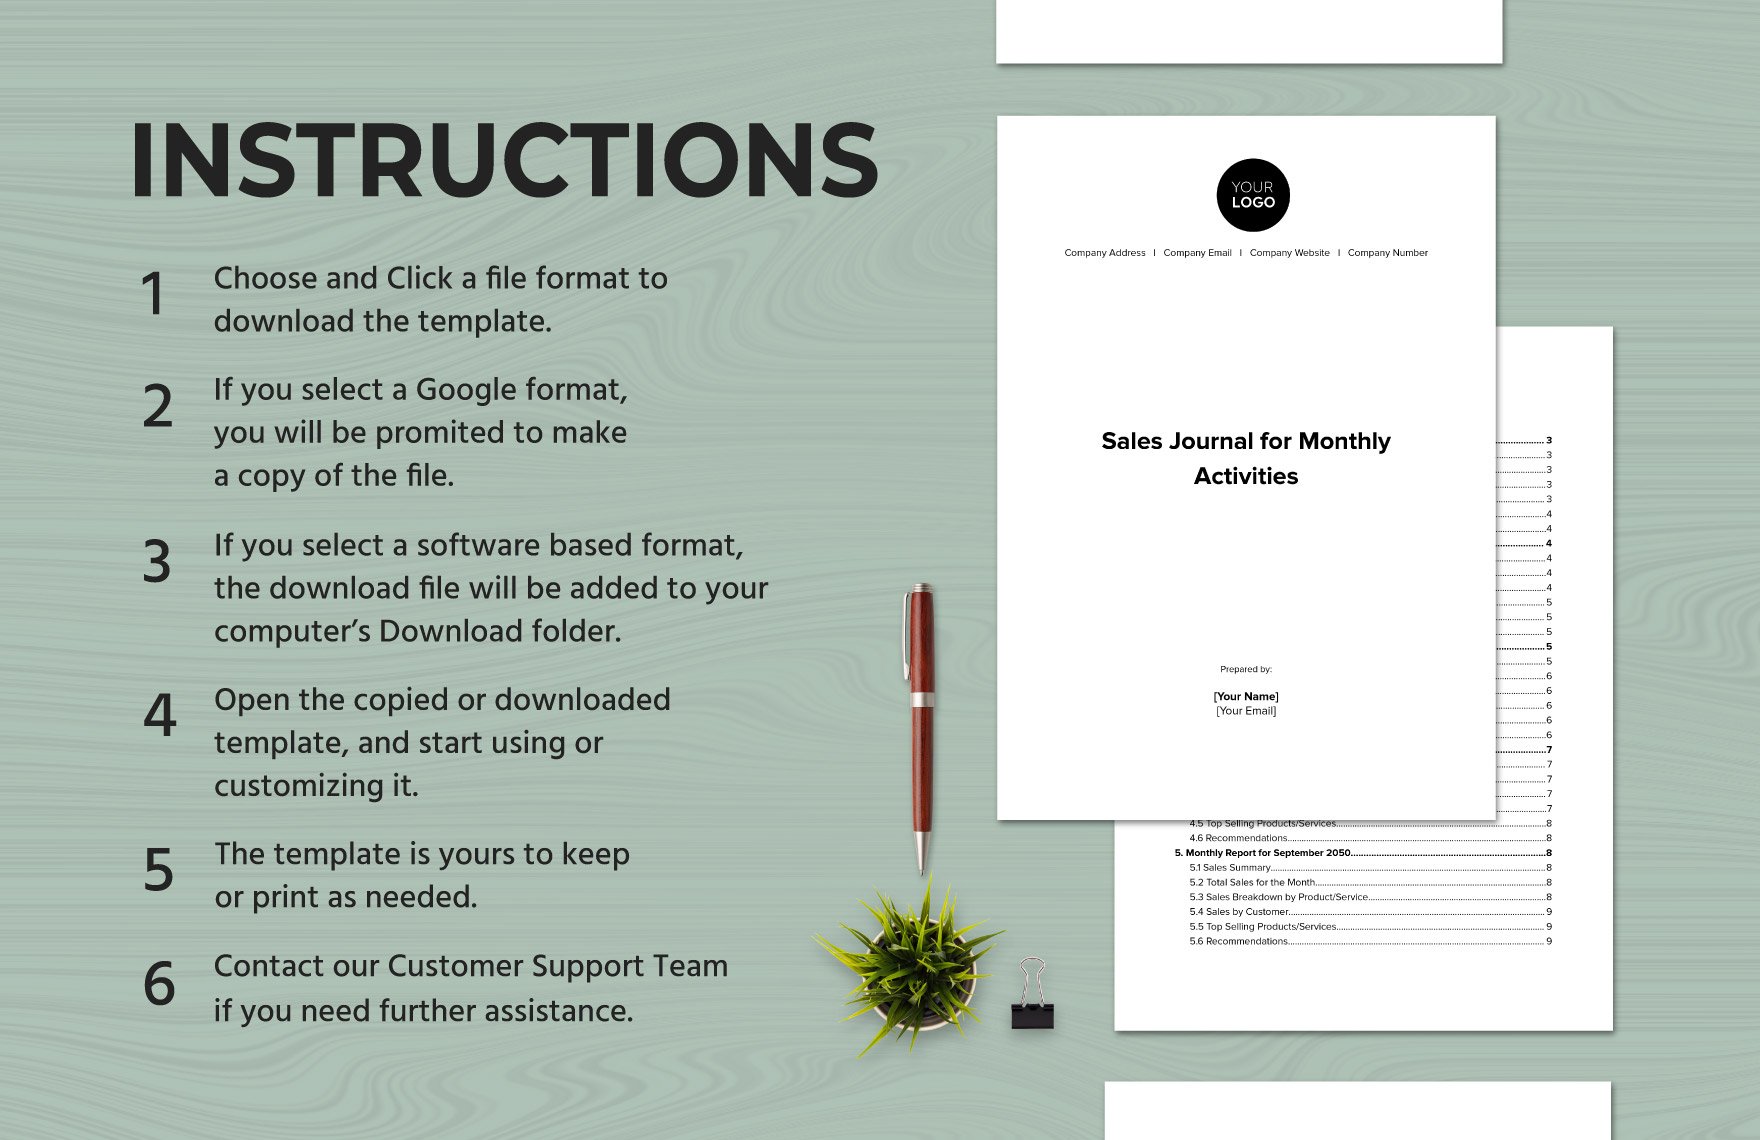 Sales Journal for Monthly Activities Template